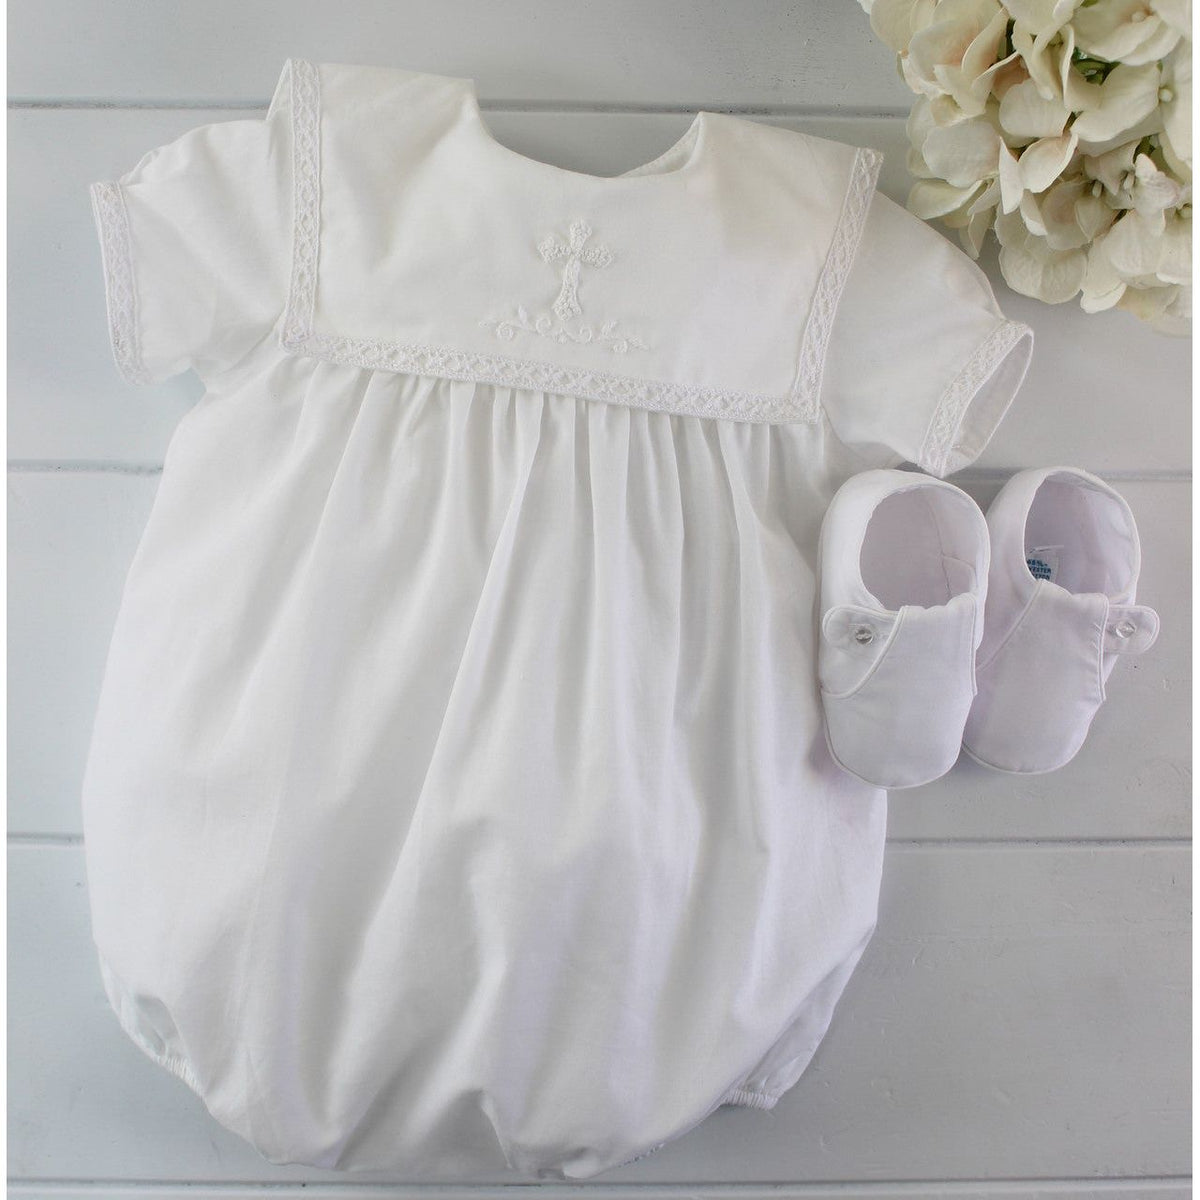 Baby Boys Christening Bubble Outfit with Cross Collar (Shoes sold separately)